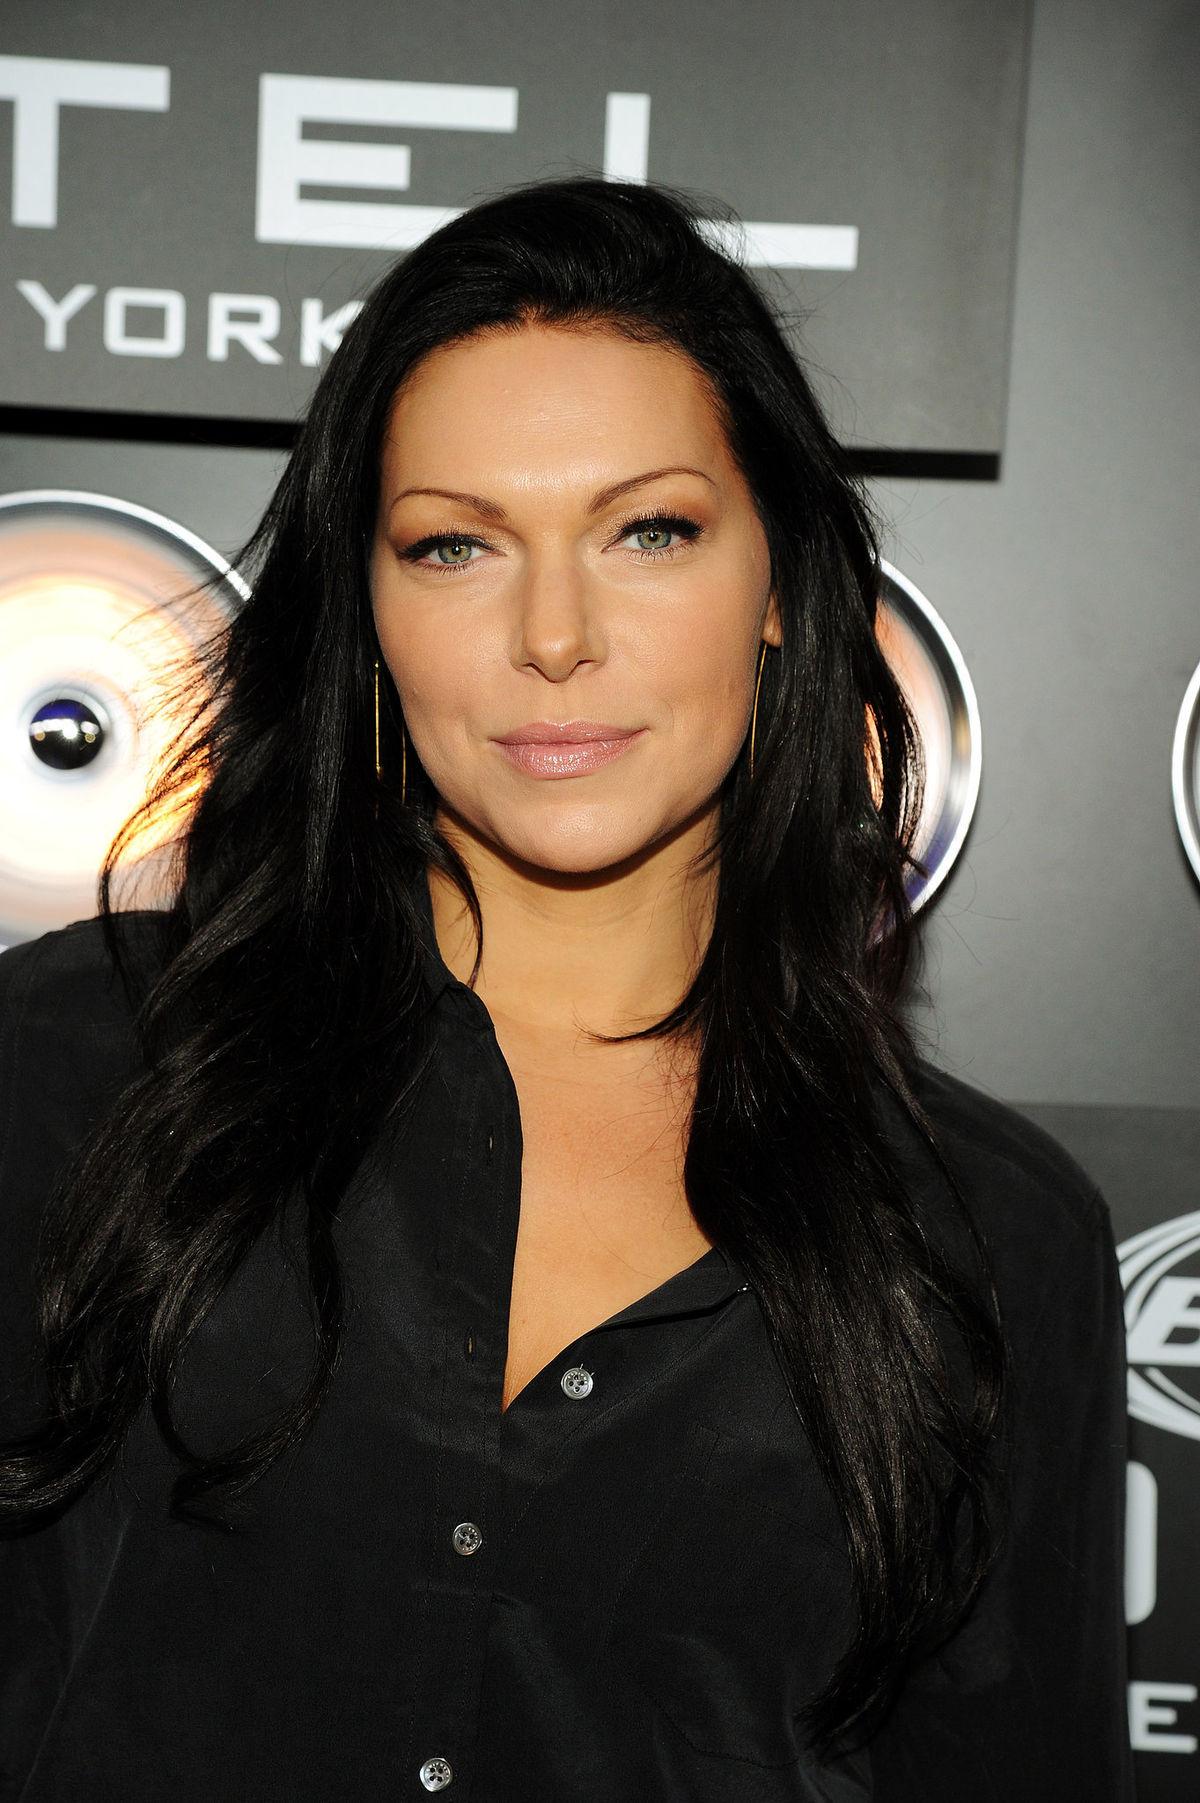 70+ Hot Pictures of Laura Prepon from Orange Is The New Black Will Get You Hot Under Collars 27